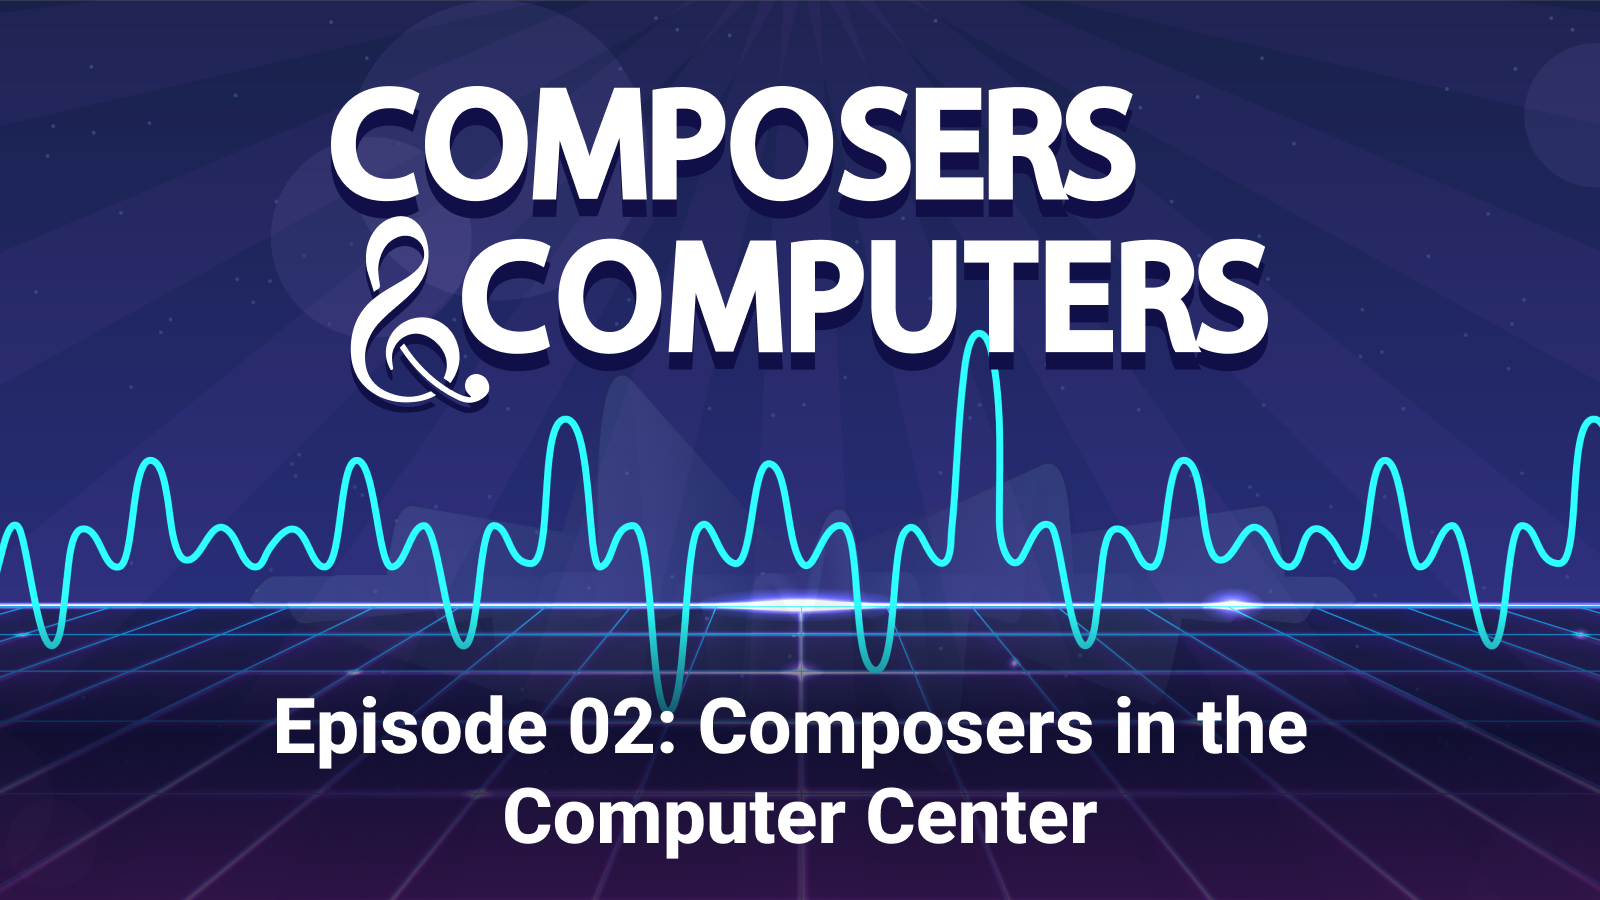 Composers & Computers. Ampersand is a treble clef. Episode 02: Composers in the Computer Center. Sound wave image below podcast title.